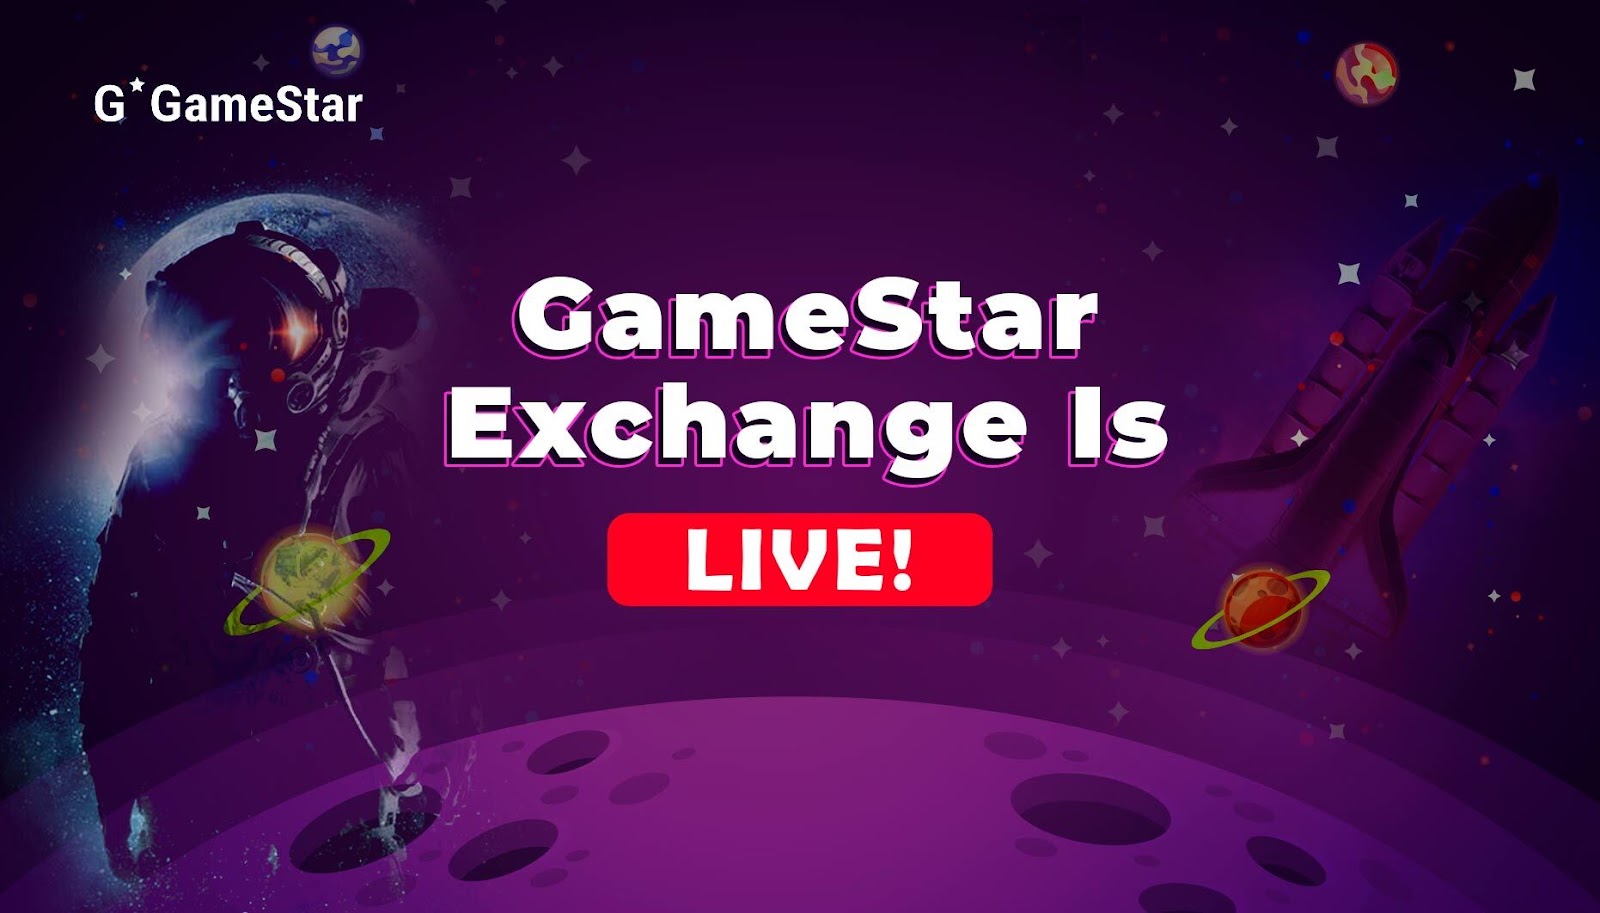 Trade Gift Cards Securely at Low-Cost with GameStar Exchange